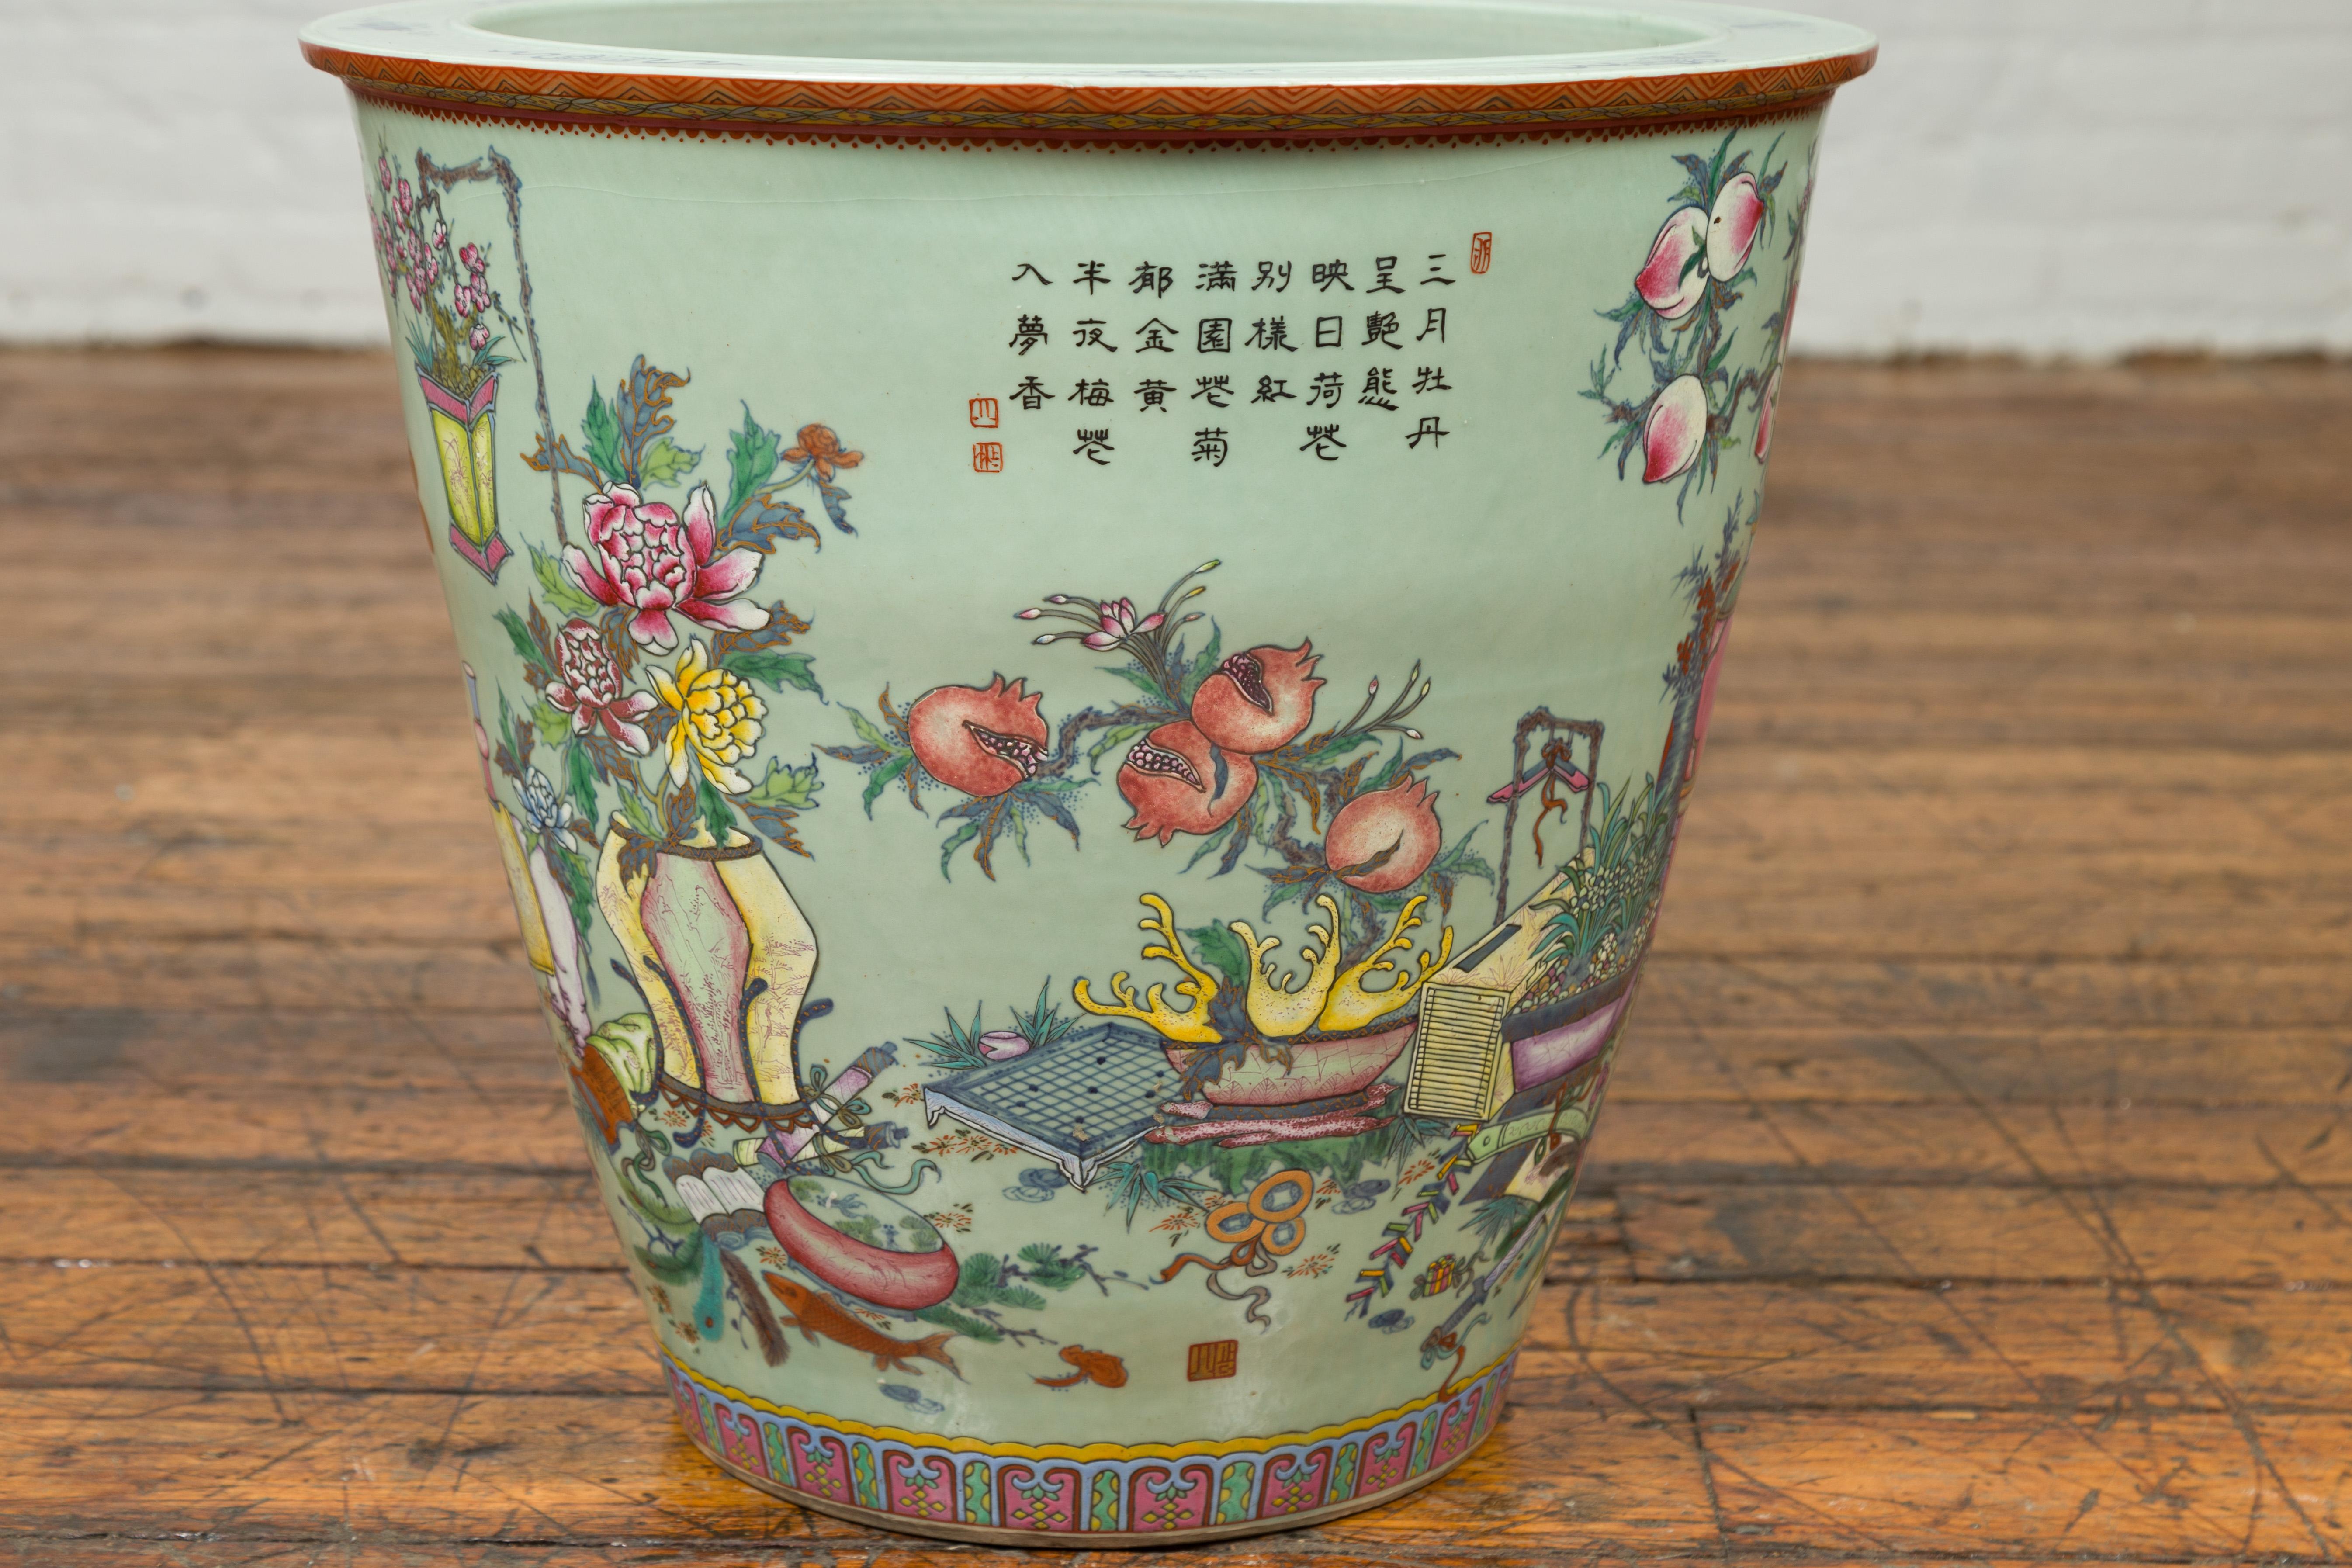 Chinese Vintage Soft Green Vase with Hand Painted Decor of Flowers and Elephants 1